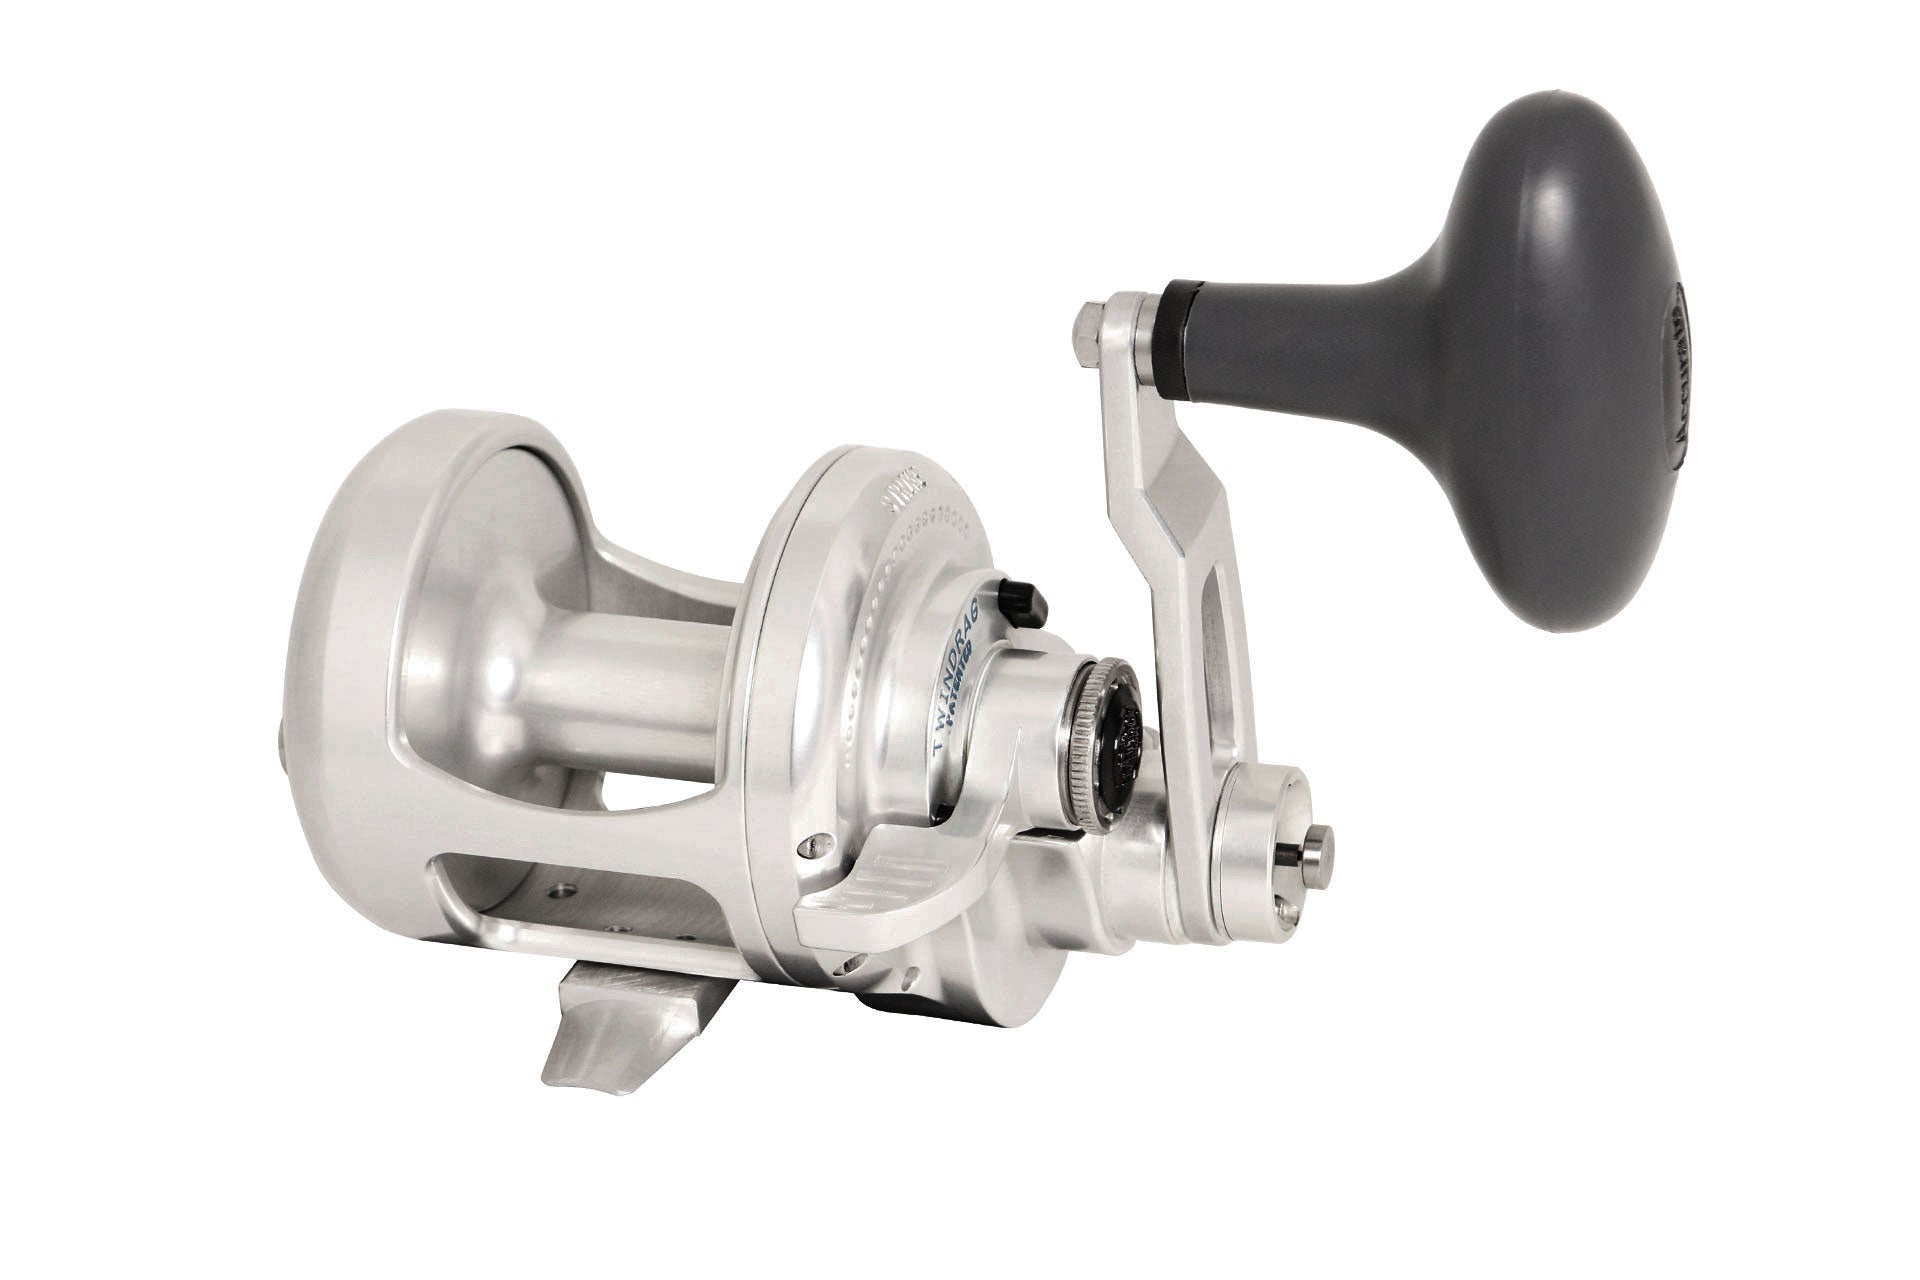 ACCURATE BOSS EXTREME 2-SPEED REELS - Fisherman's Outfitter